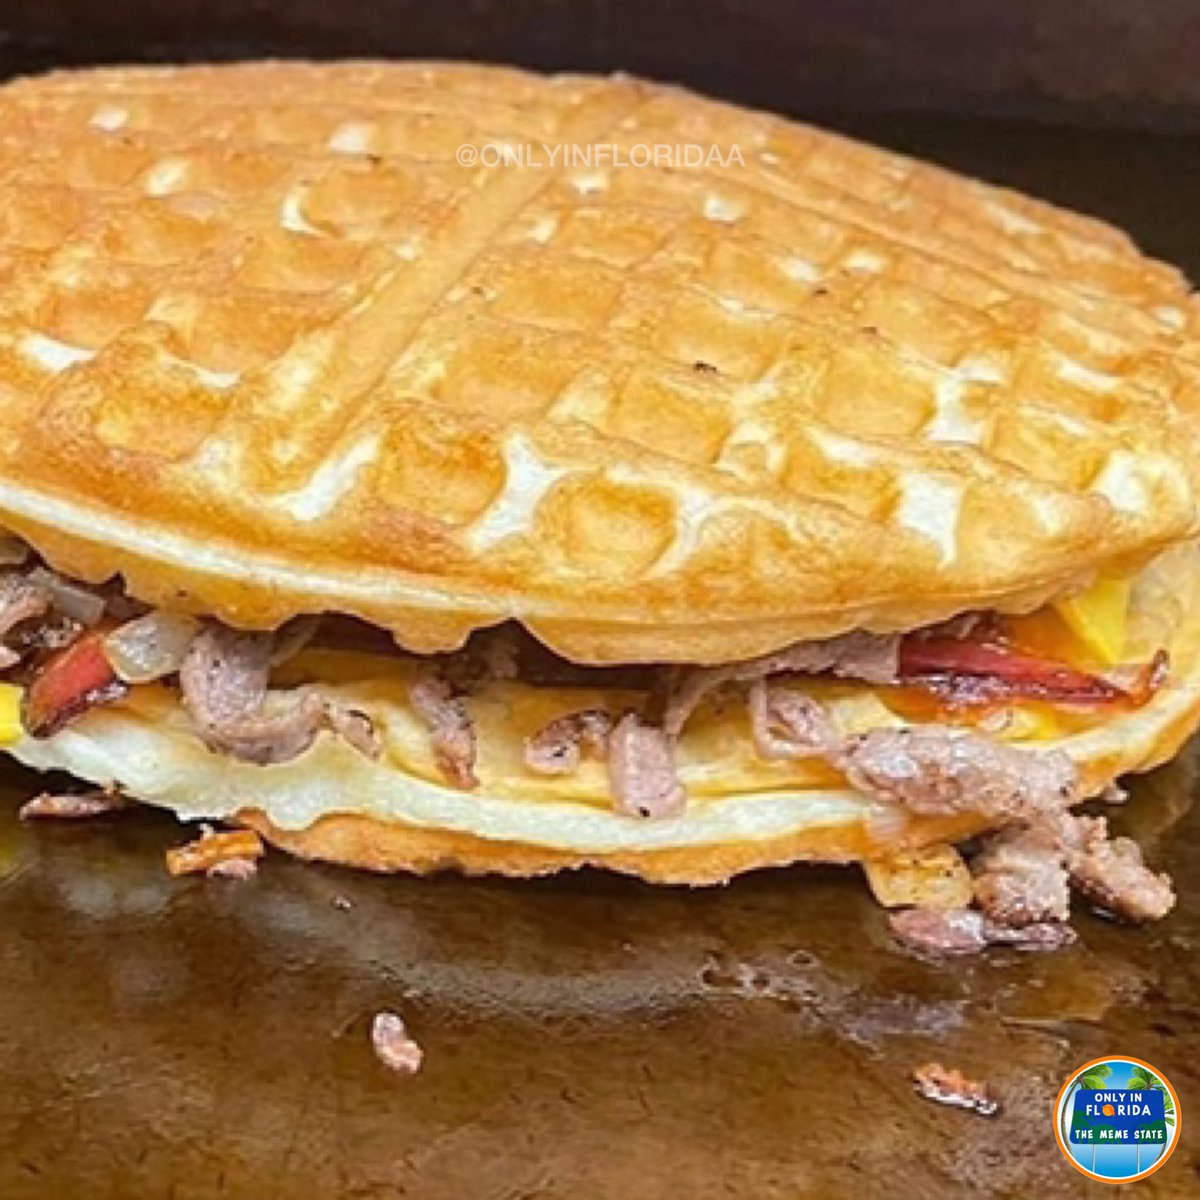 Waffle House employees are done with the TikTok sandwich hack 👀#OnlyinFlorida